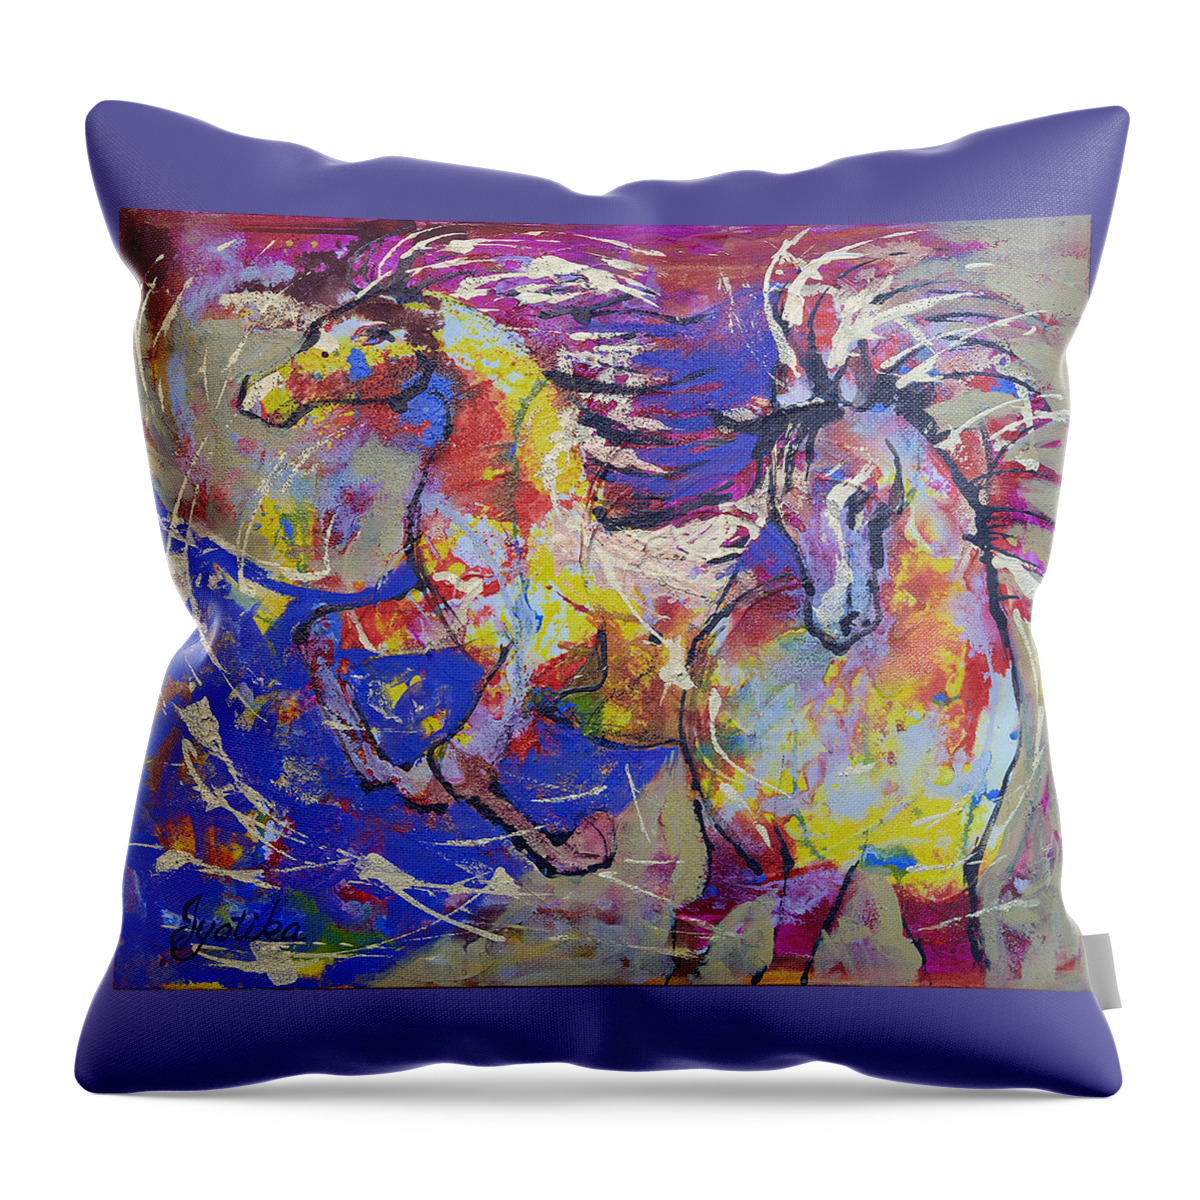 Horses Throw Pillow featuring the painting Wild Runners by Jyotika Shroff